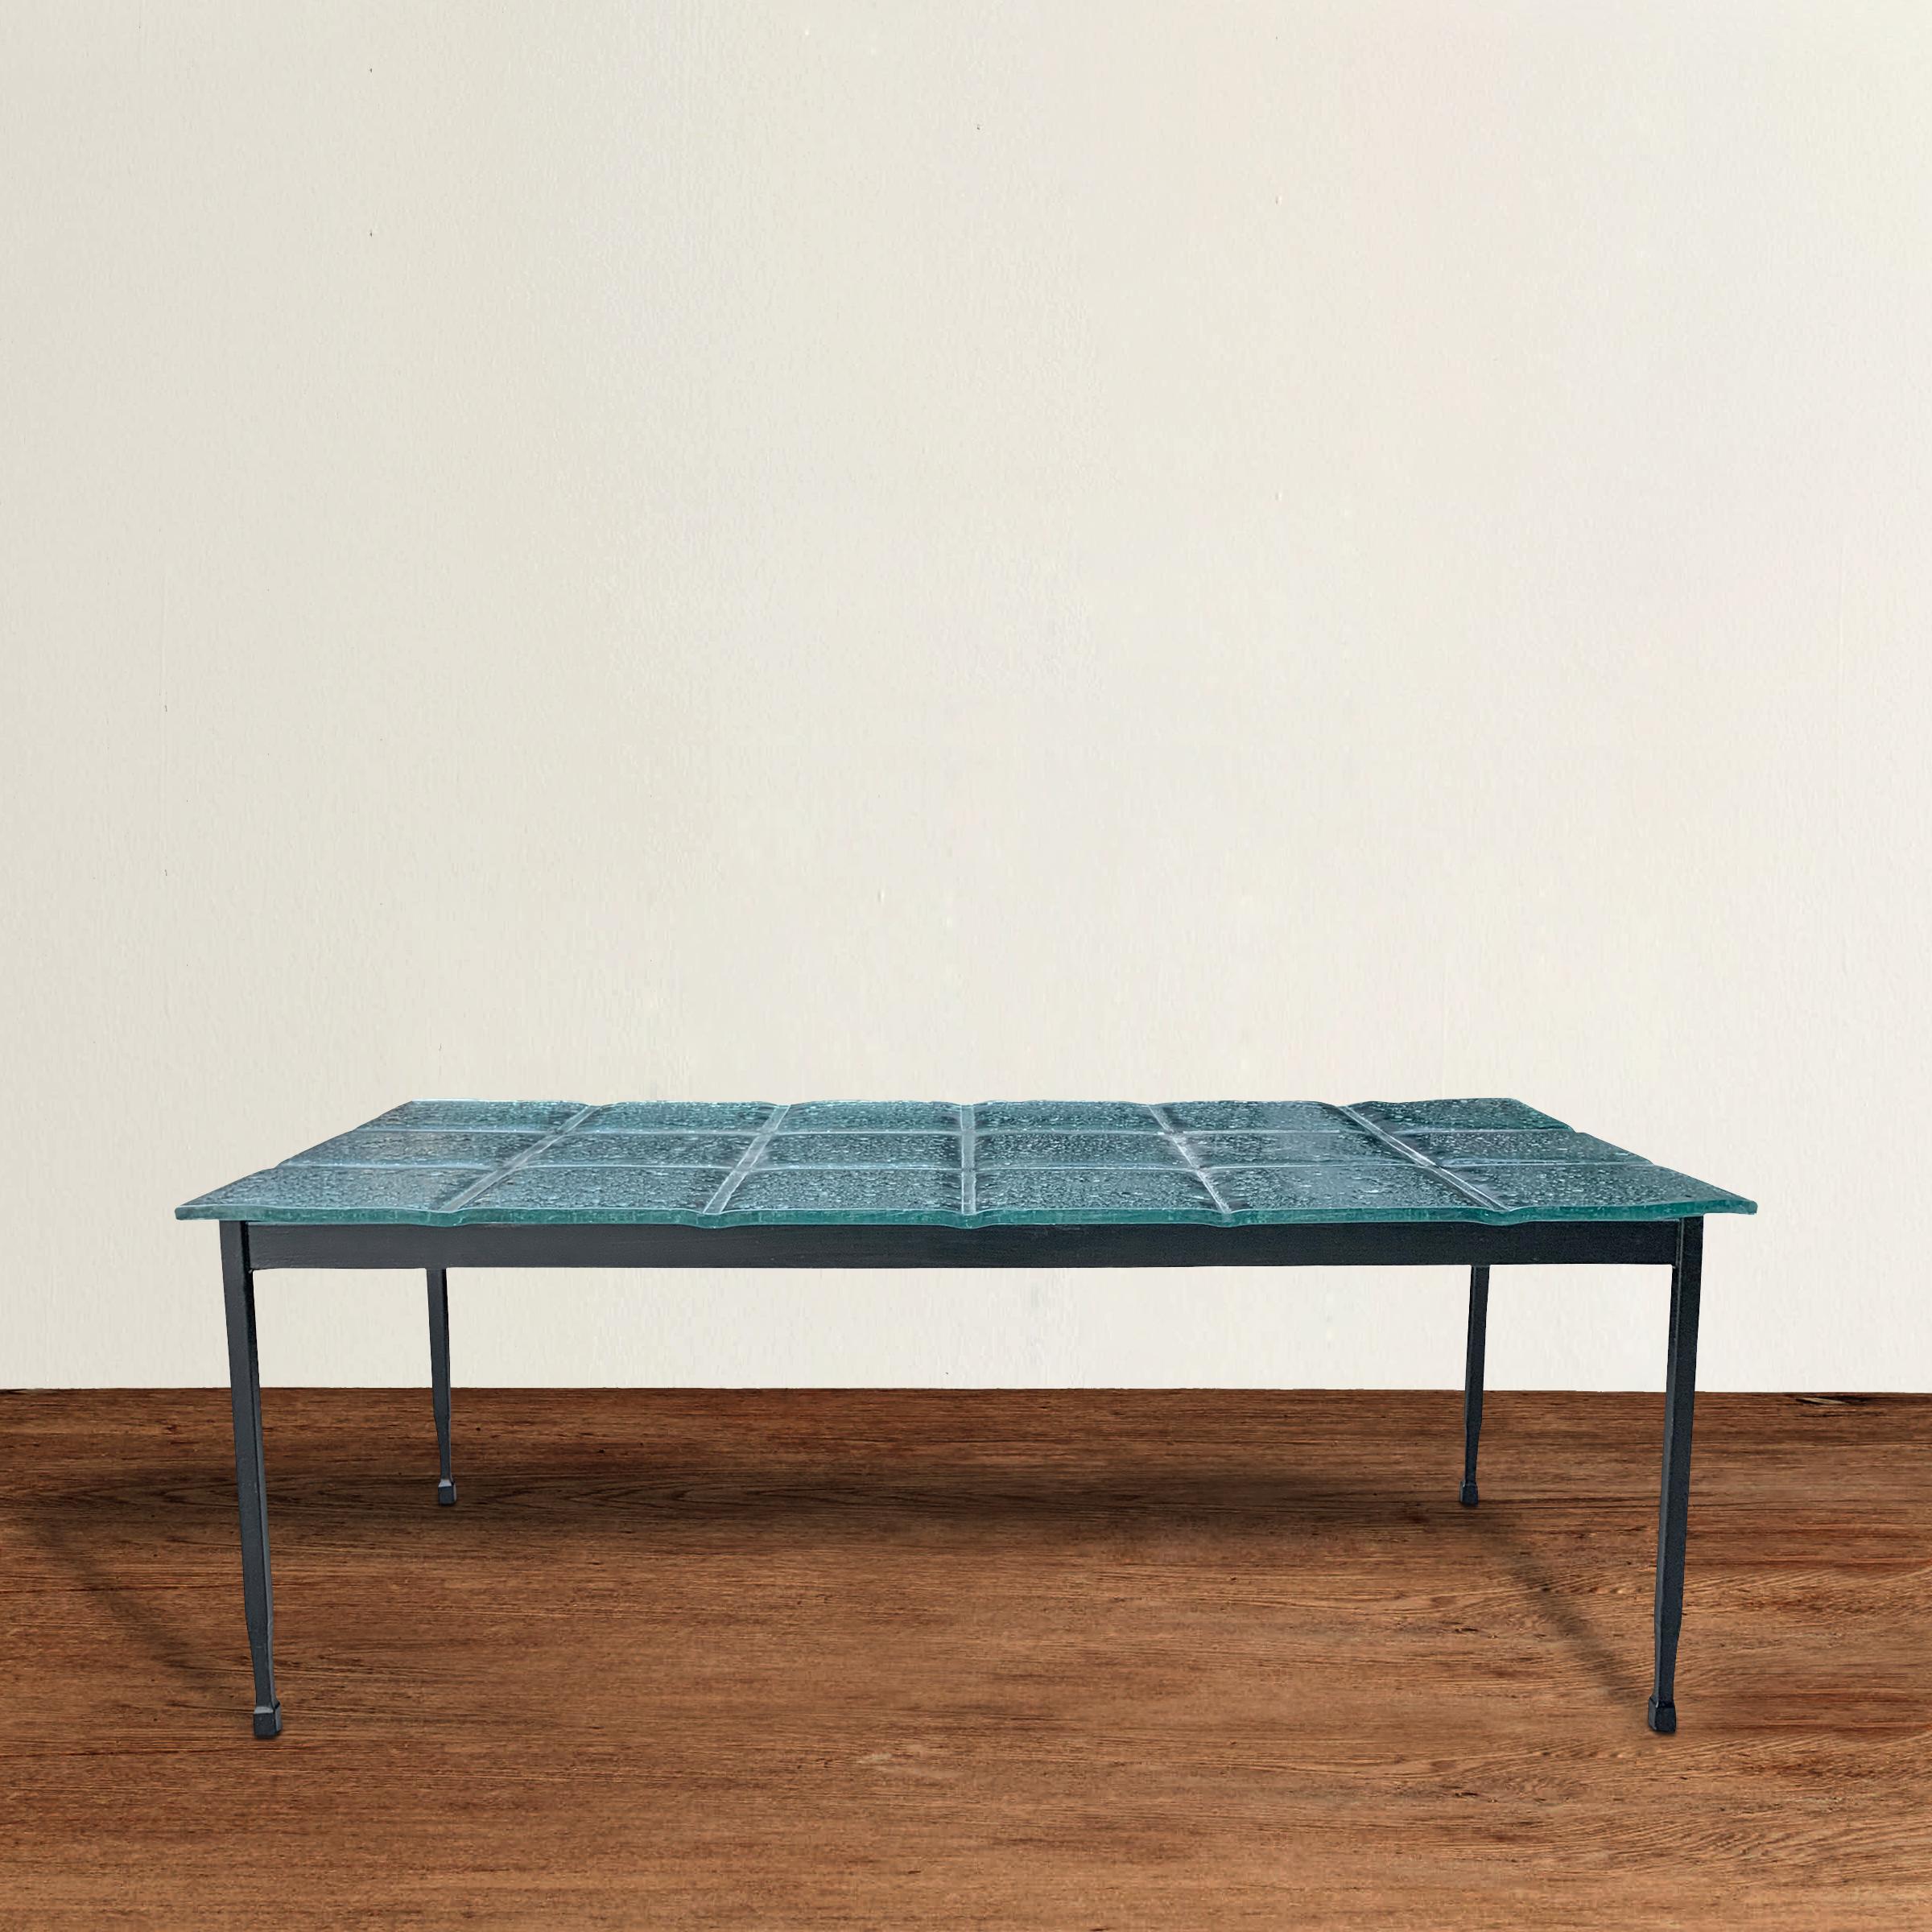 An awesome vintage American low table with a thick cast glass top with a wonderfully textured surface and simple but chic steel legs that narrow slightly at the bottom and end in a square foot.